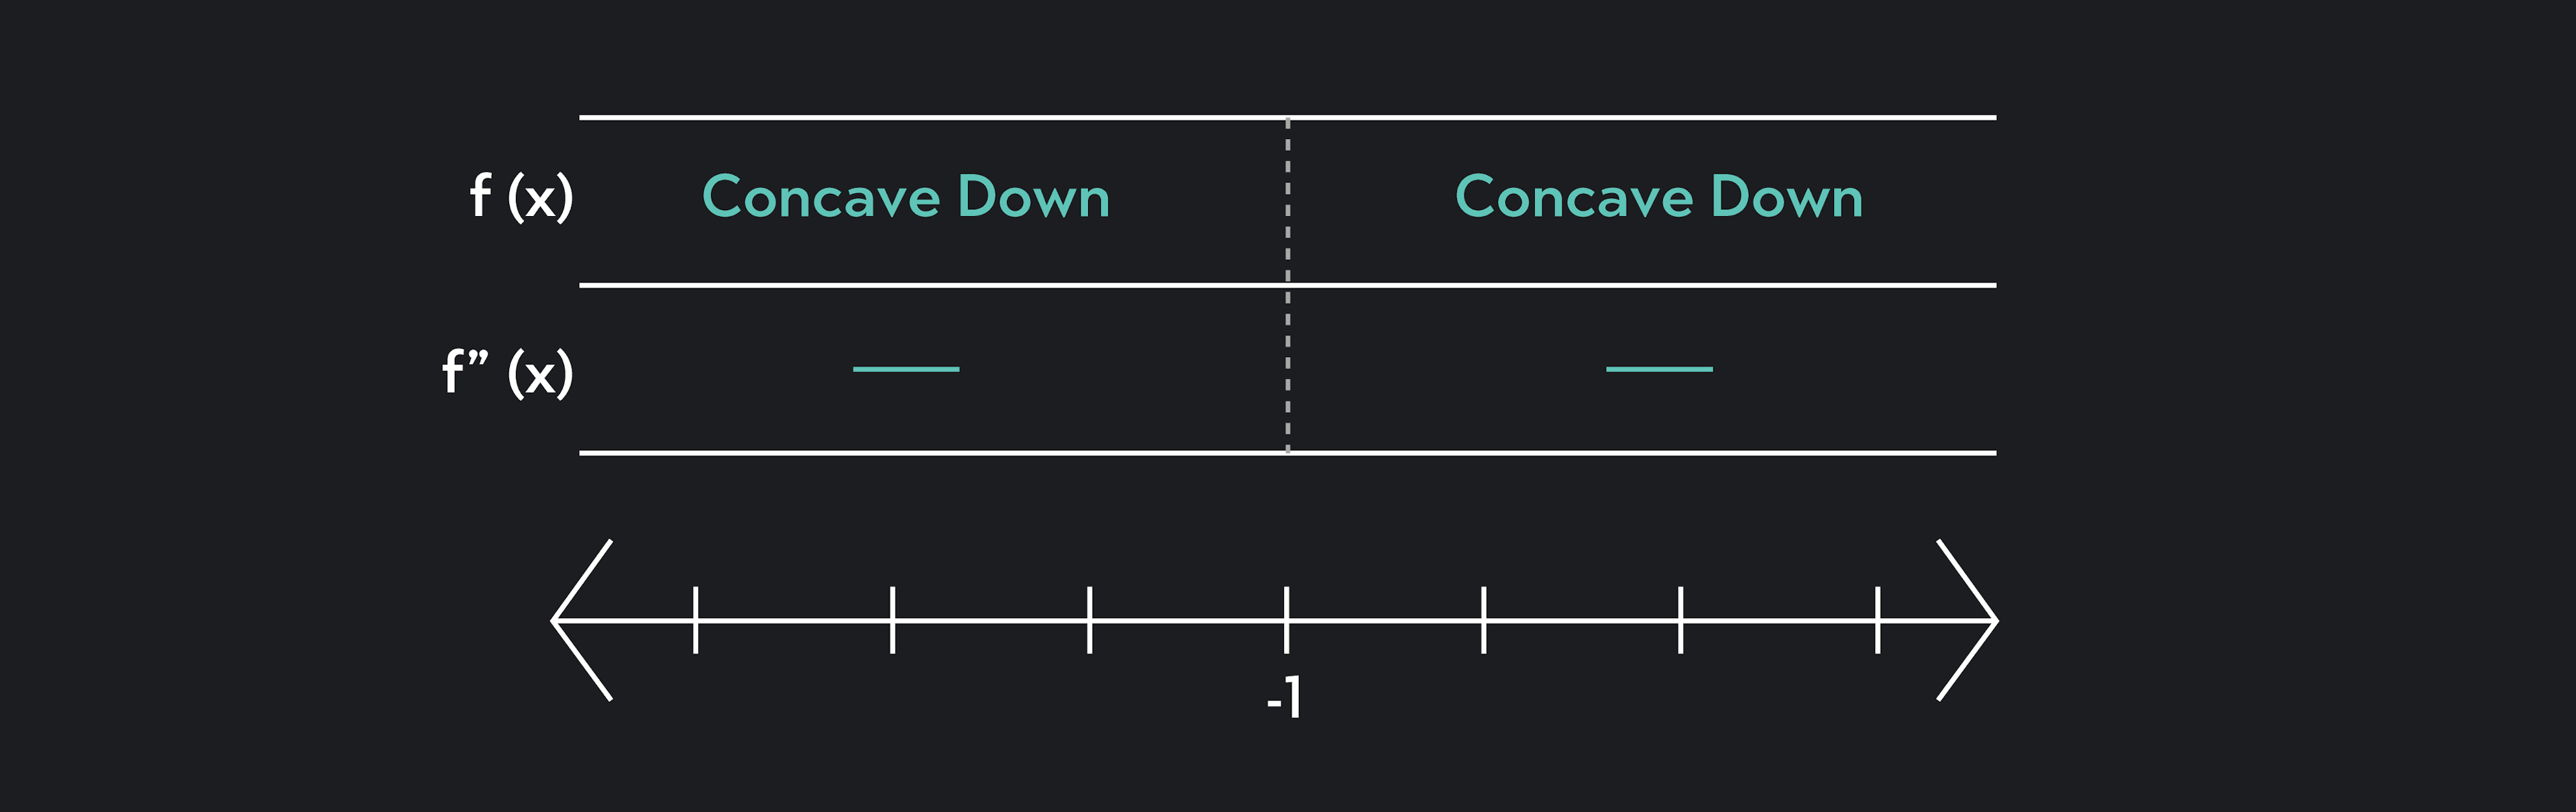 Number line showing concave down, concave up, and -1 = inflection point